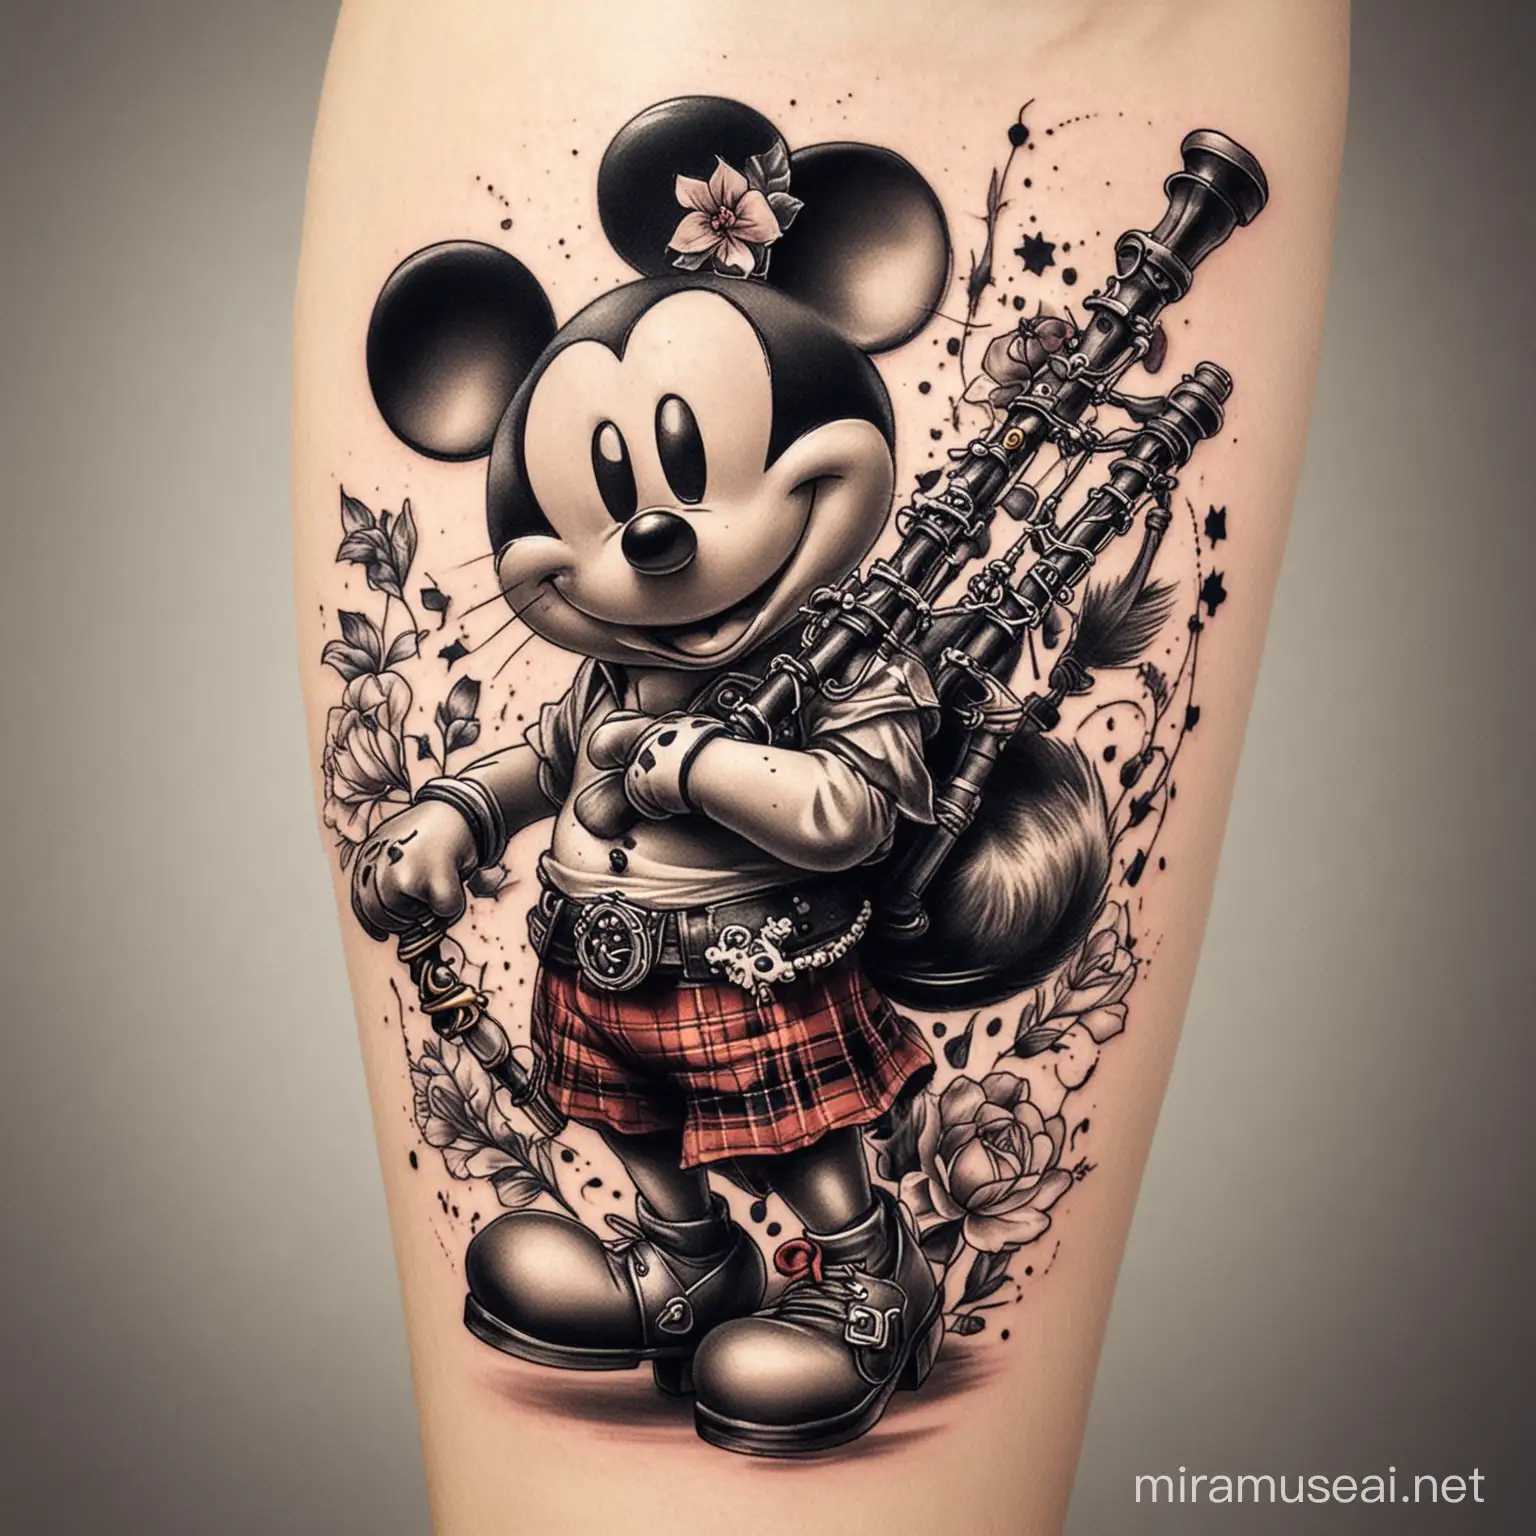 design a tattoo of Mickey Mouse in high heels playing bagpipes with a lucky cat next to it